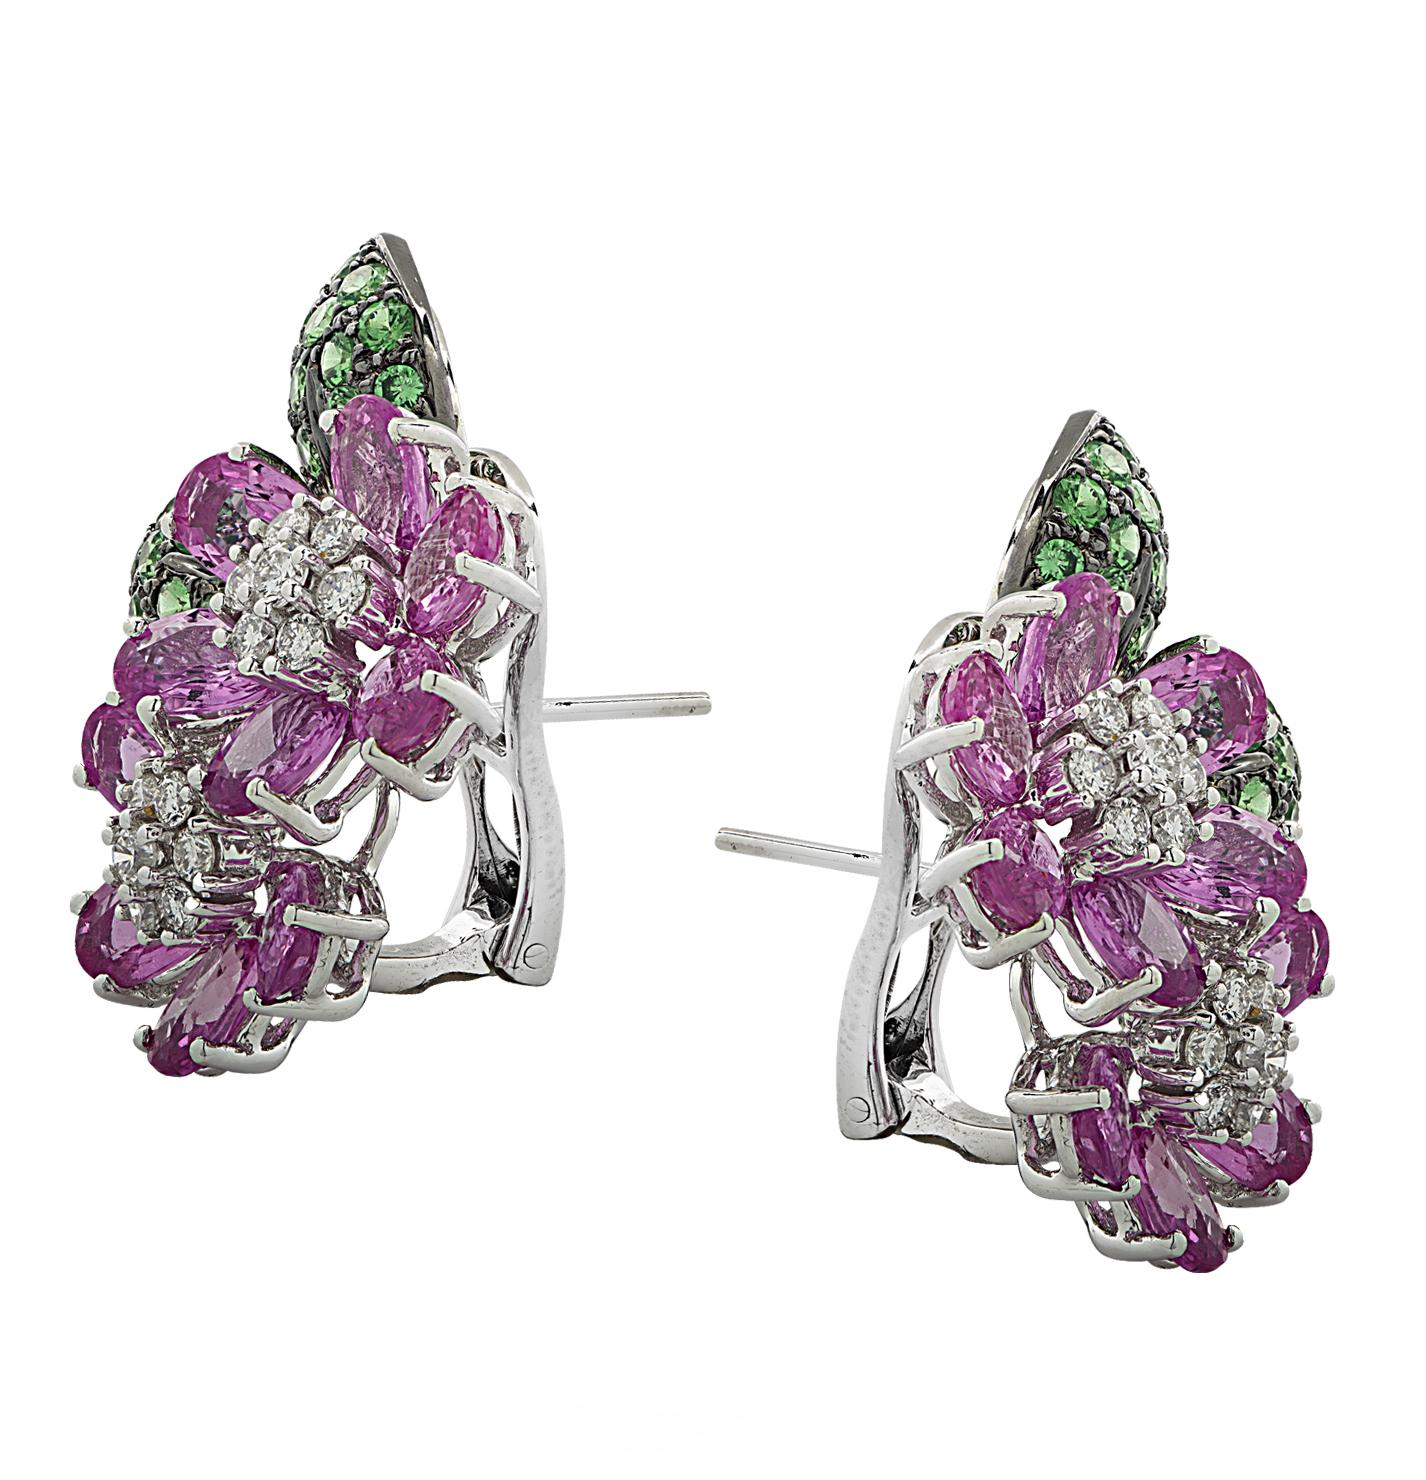 Enchanting earrings crafted in 18 karat white gold with black rhodium, featuring 20 oval pink sapphires weighing approximately 11.15 carats total, 50 round tsavorites weighing approximately 1.78 carats total and 28 round brilliant cut diamonds